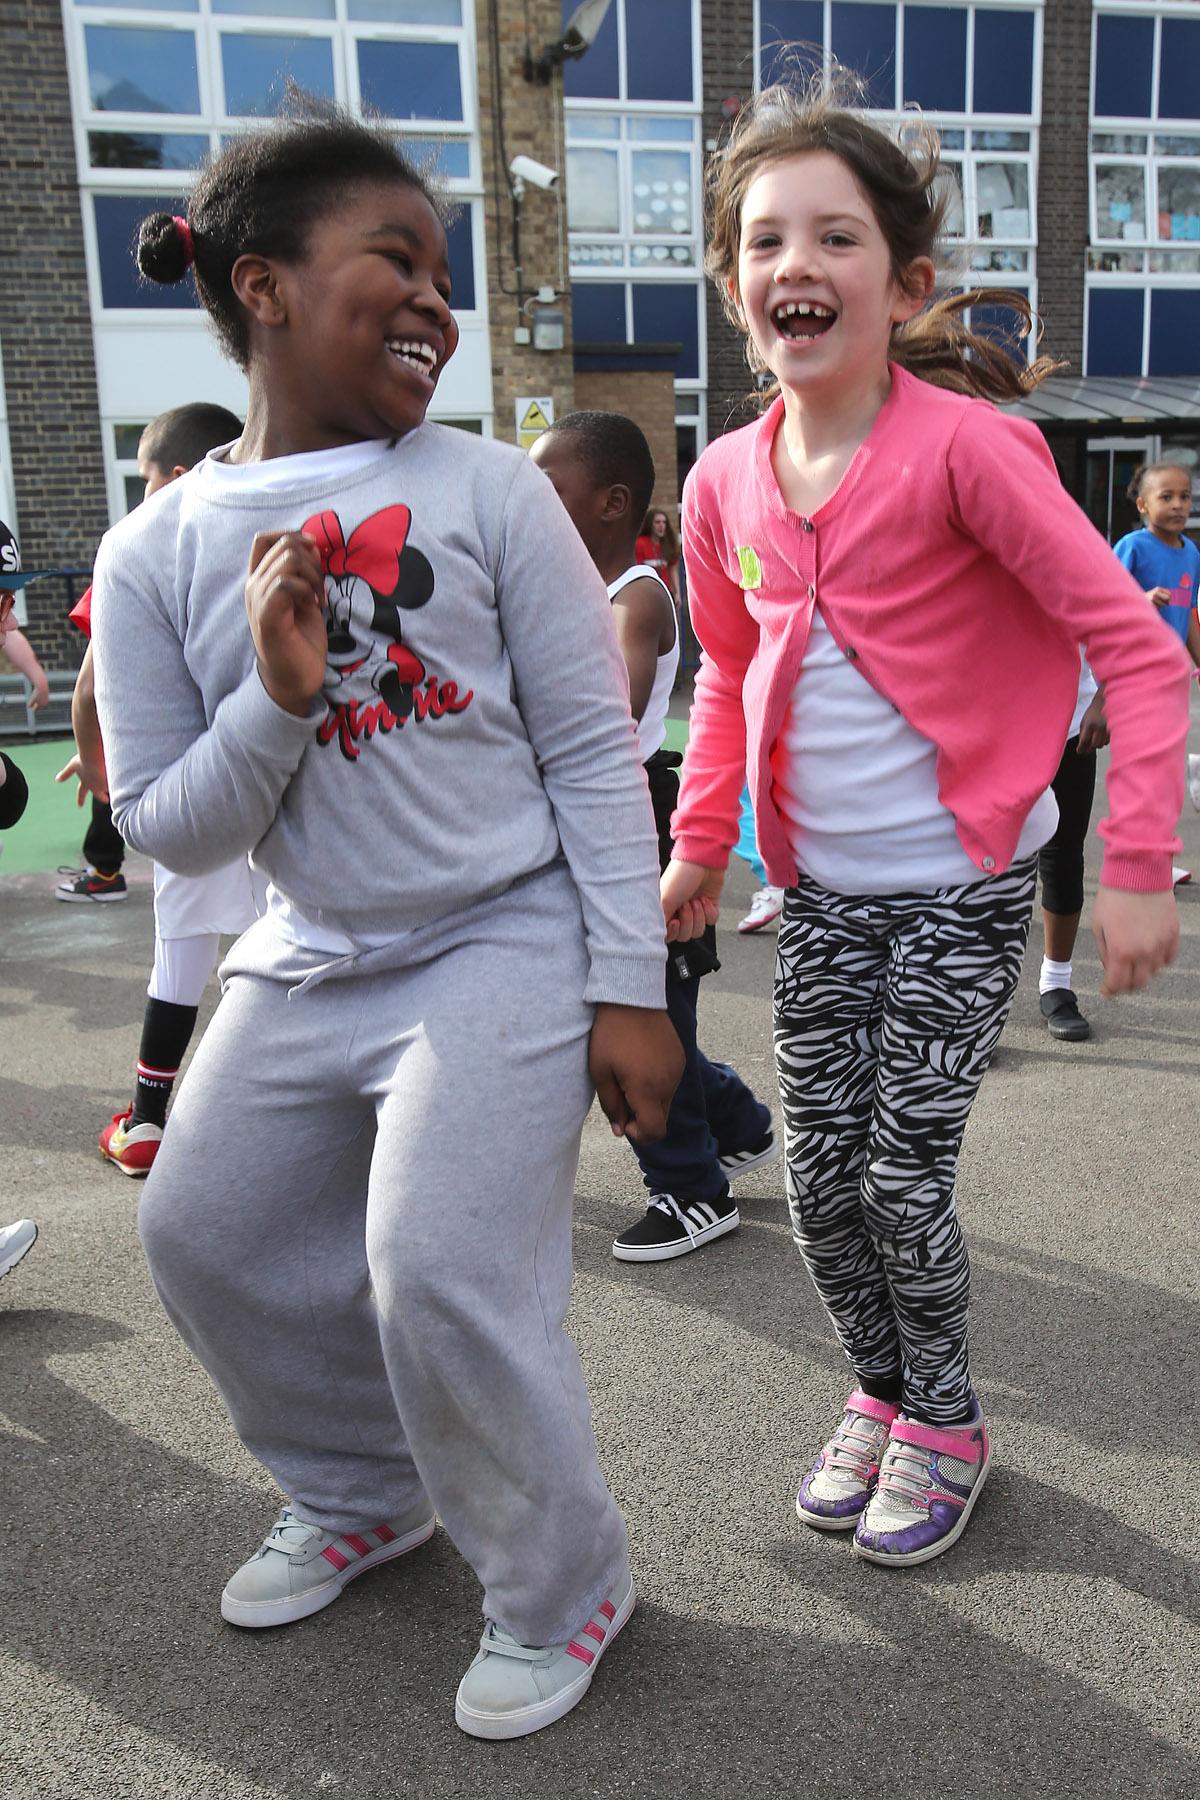 Children take part in a school dance-off for sports relief at St Mary's C of E Primary School, Brooke Road, Walthamstow. (21/3/2014) EL75987_4